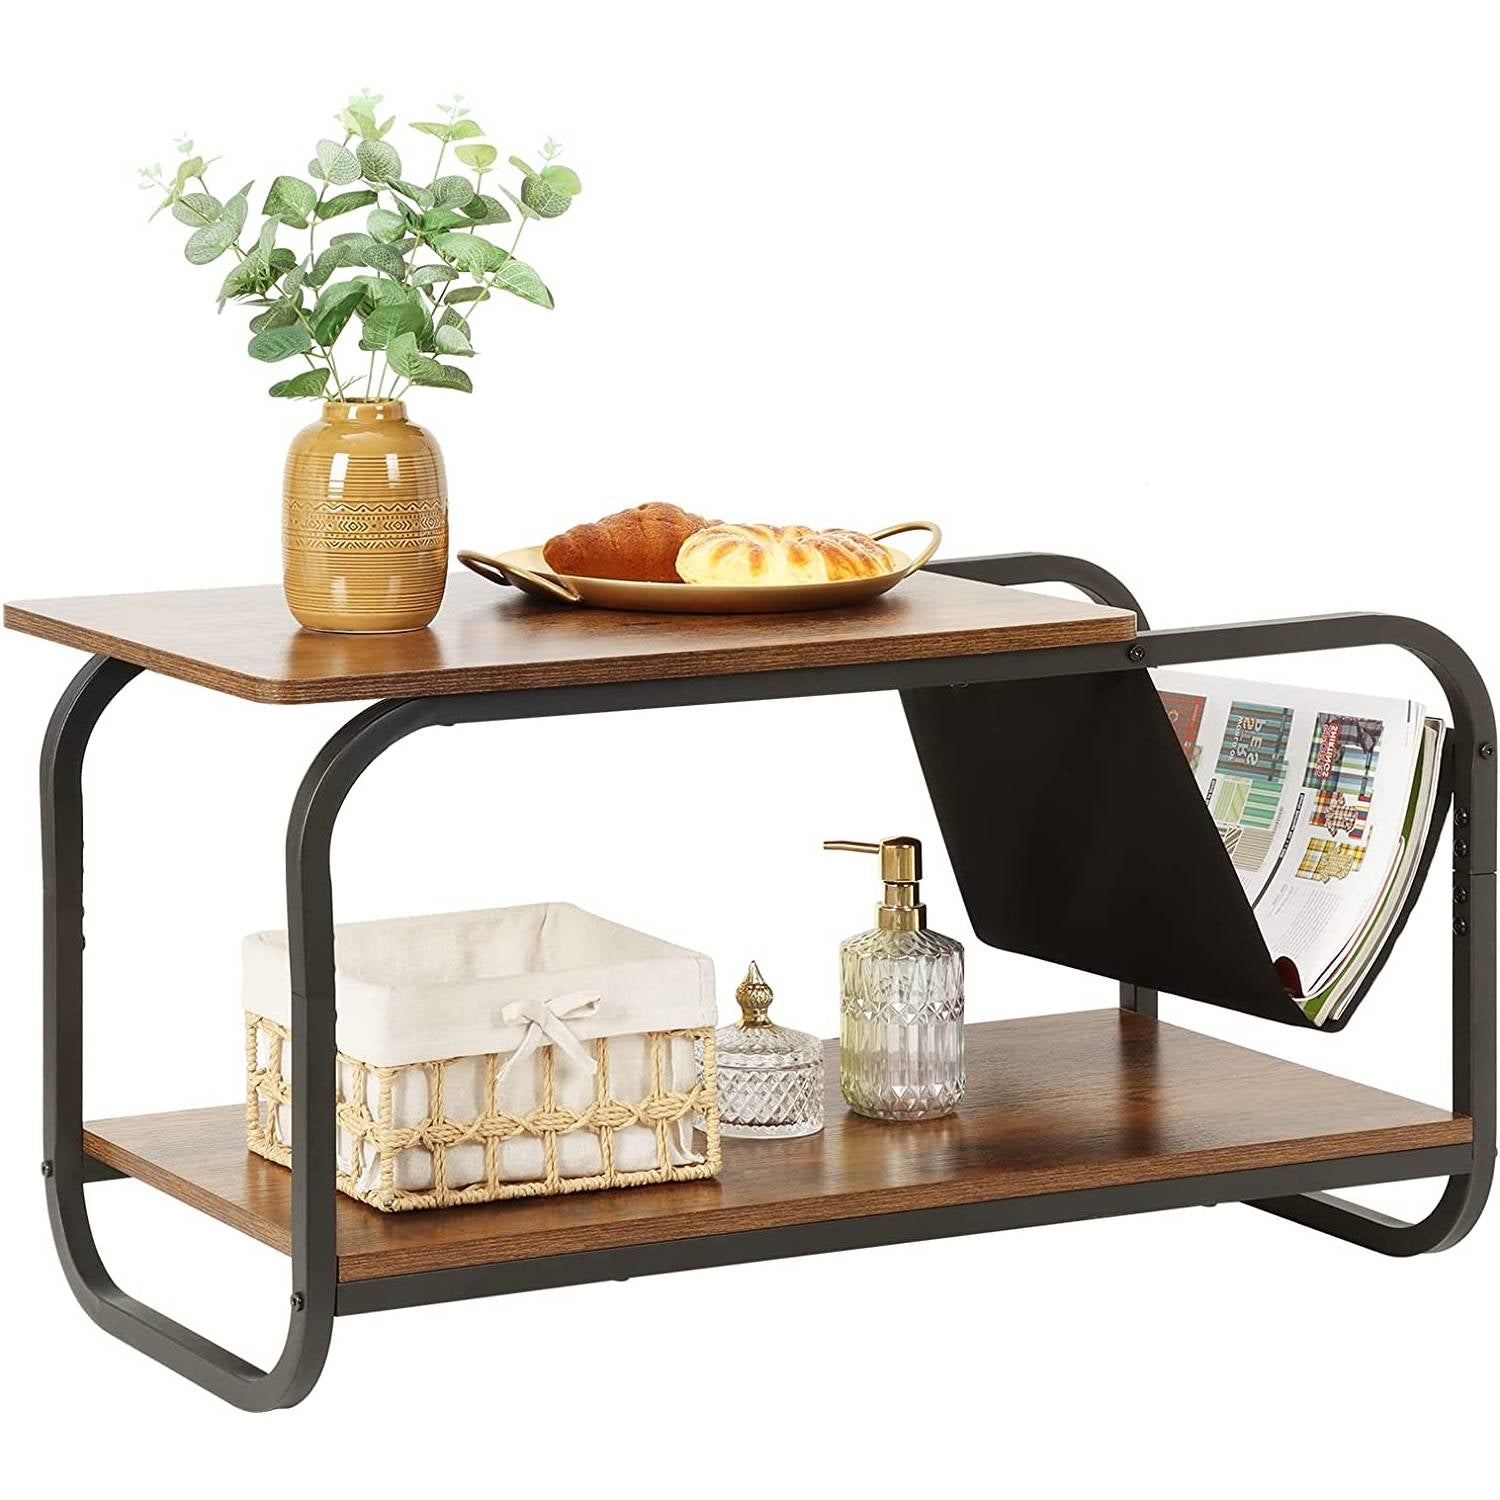 Modern 2-Tier Coffee Table with Magazine Book Holder Sling in Brown Wood Finish